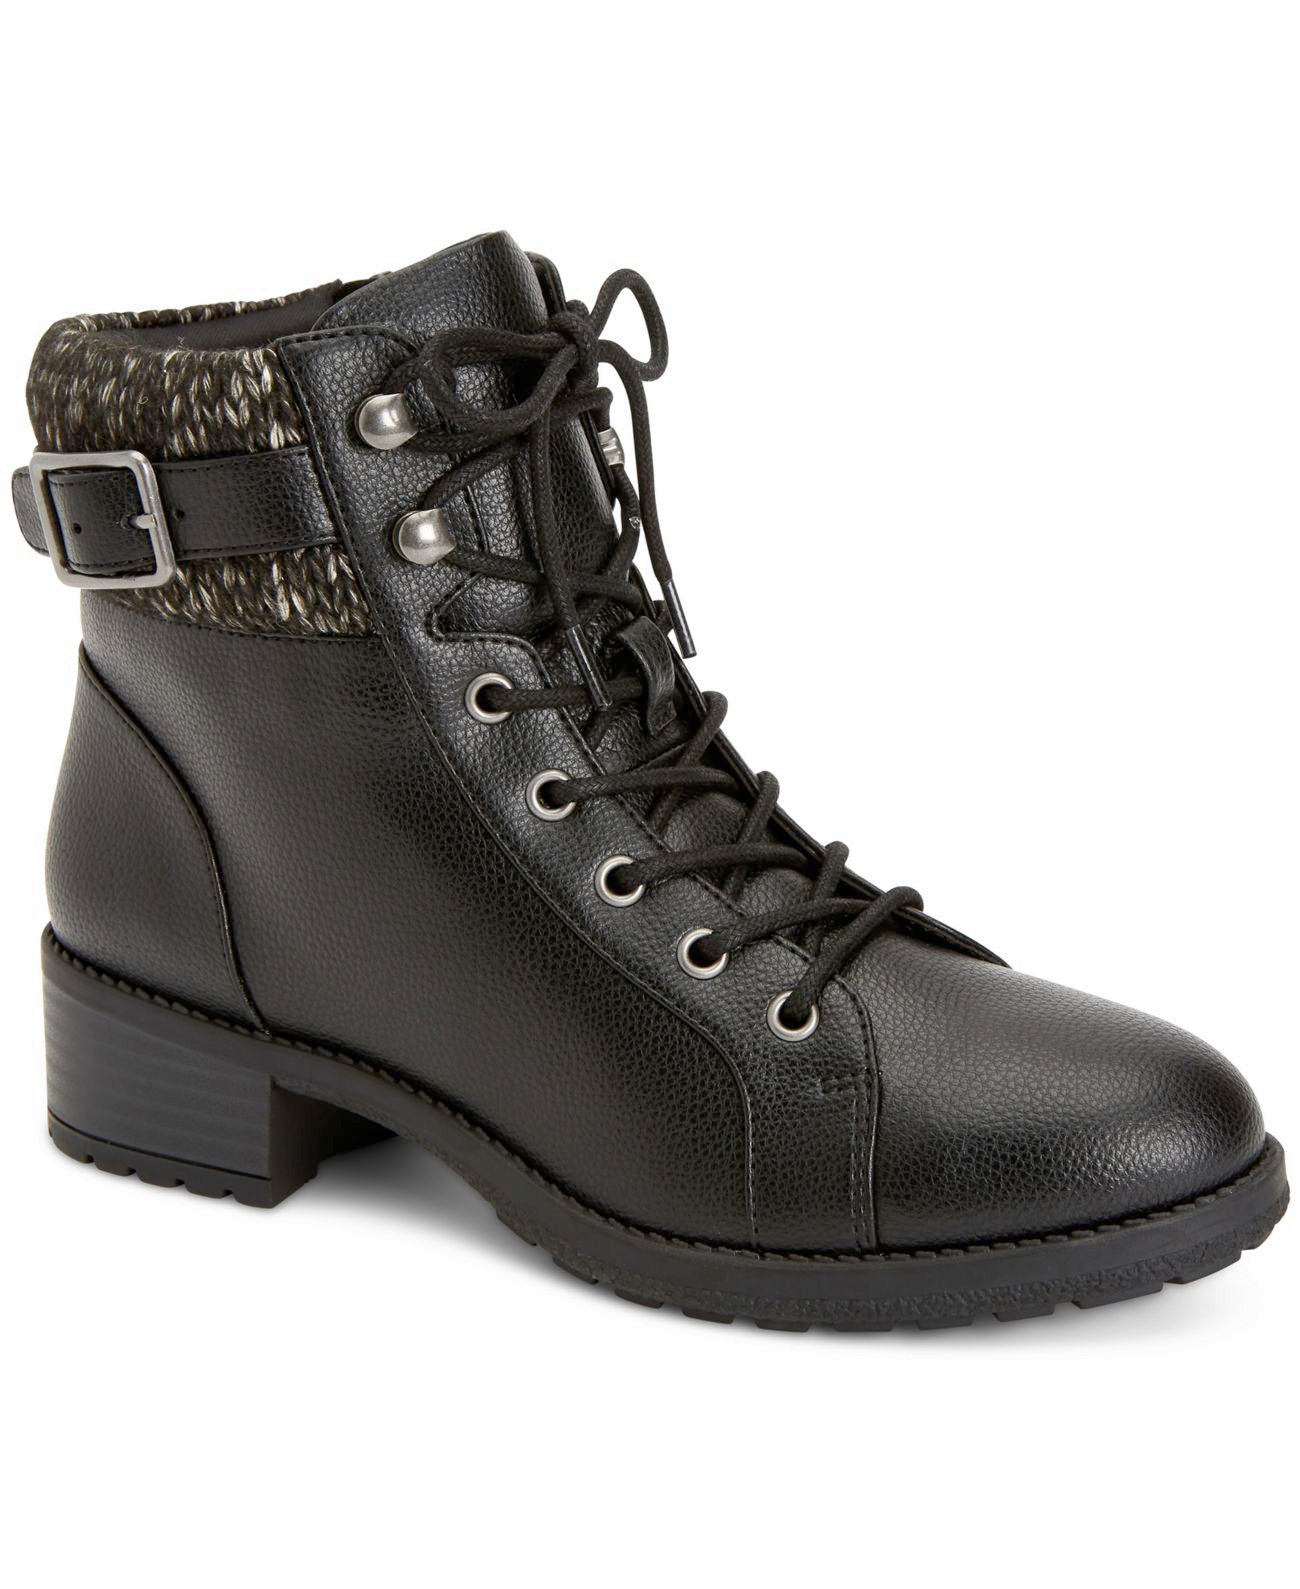 Style & Co Womens Gaiel Lace-Up Cold-Weather Lug Sole Booties